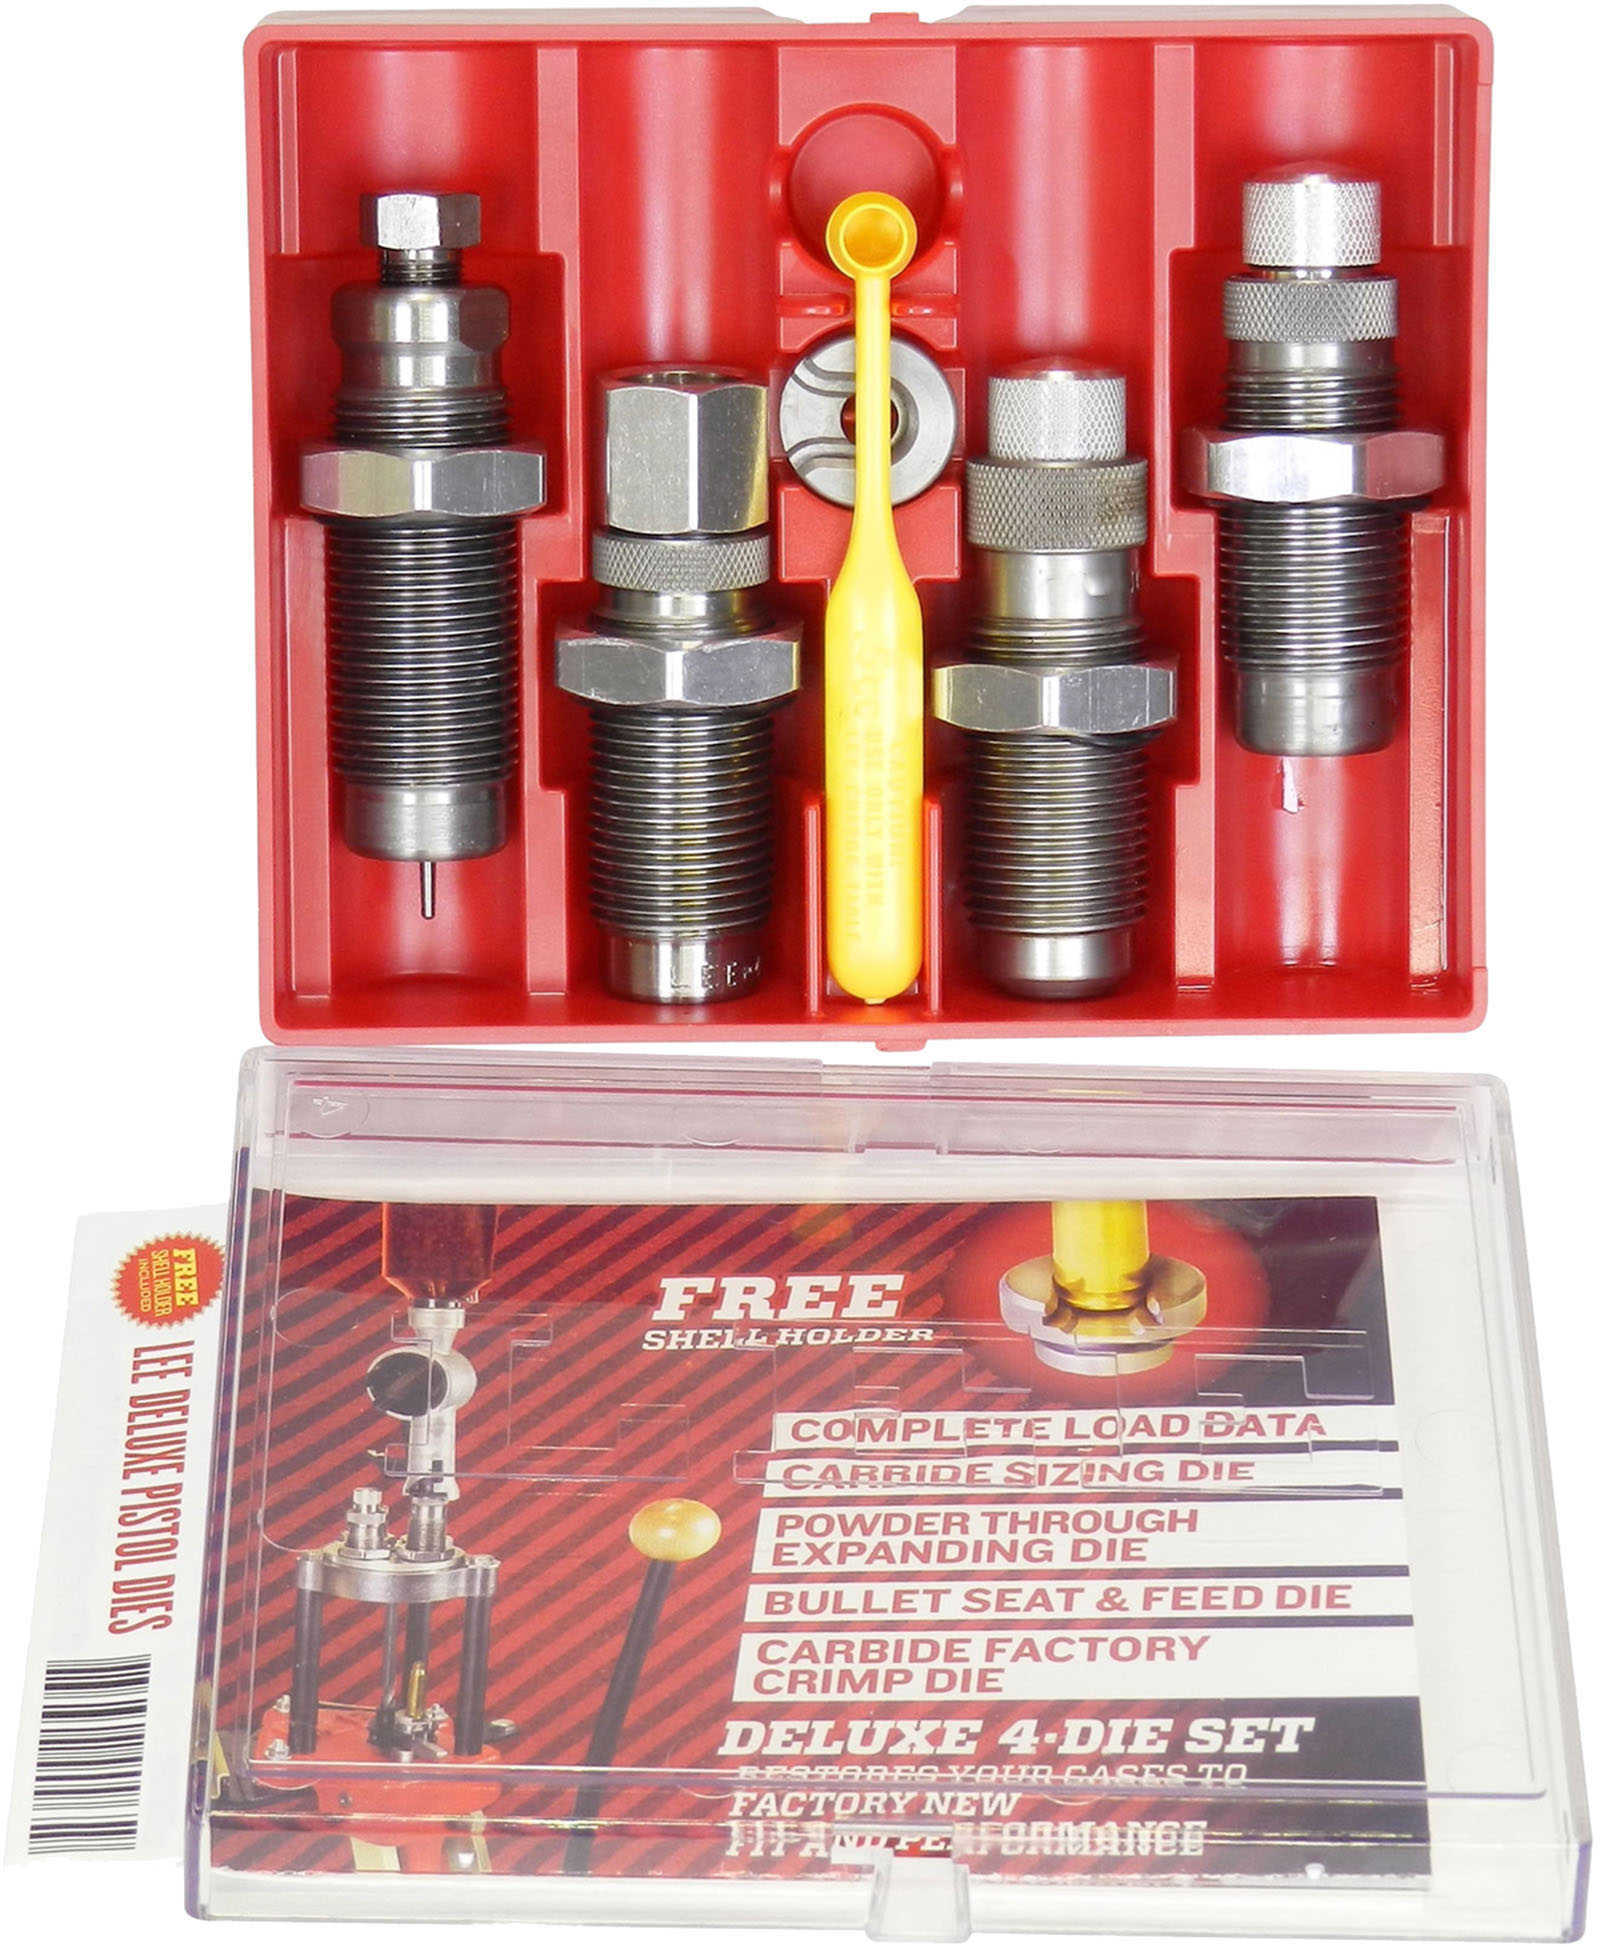 Lee Deluxe Pistol Carbide 4-Die Set With Shellholder For 40 S&W Md: 90965